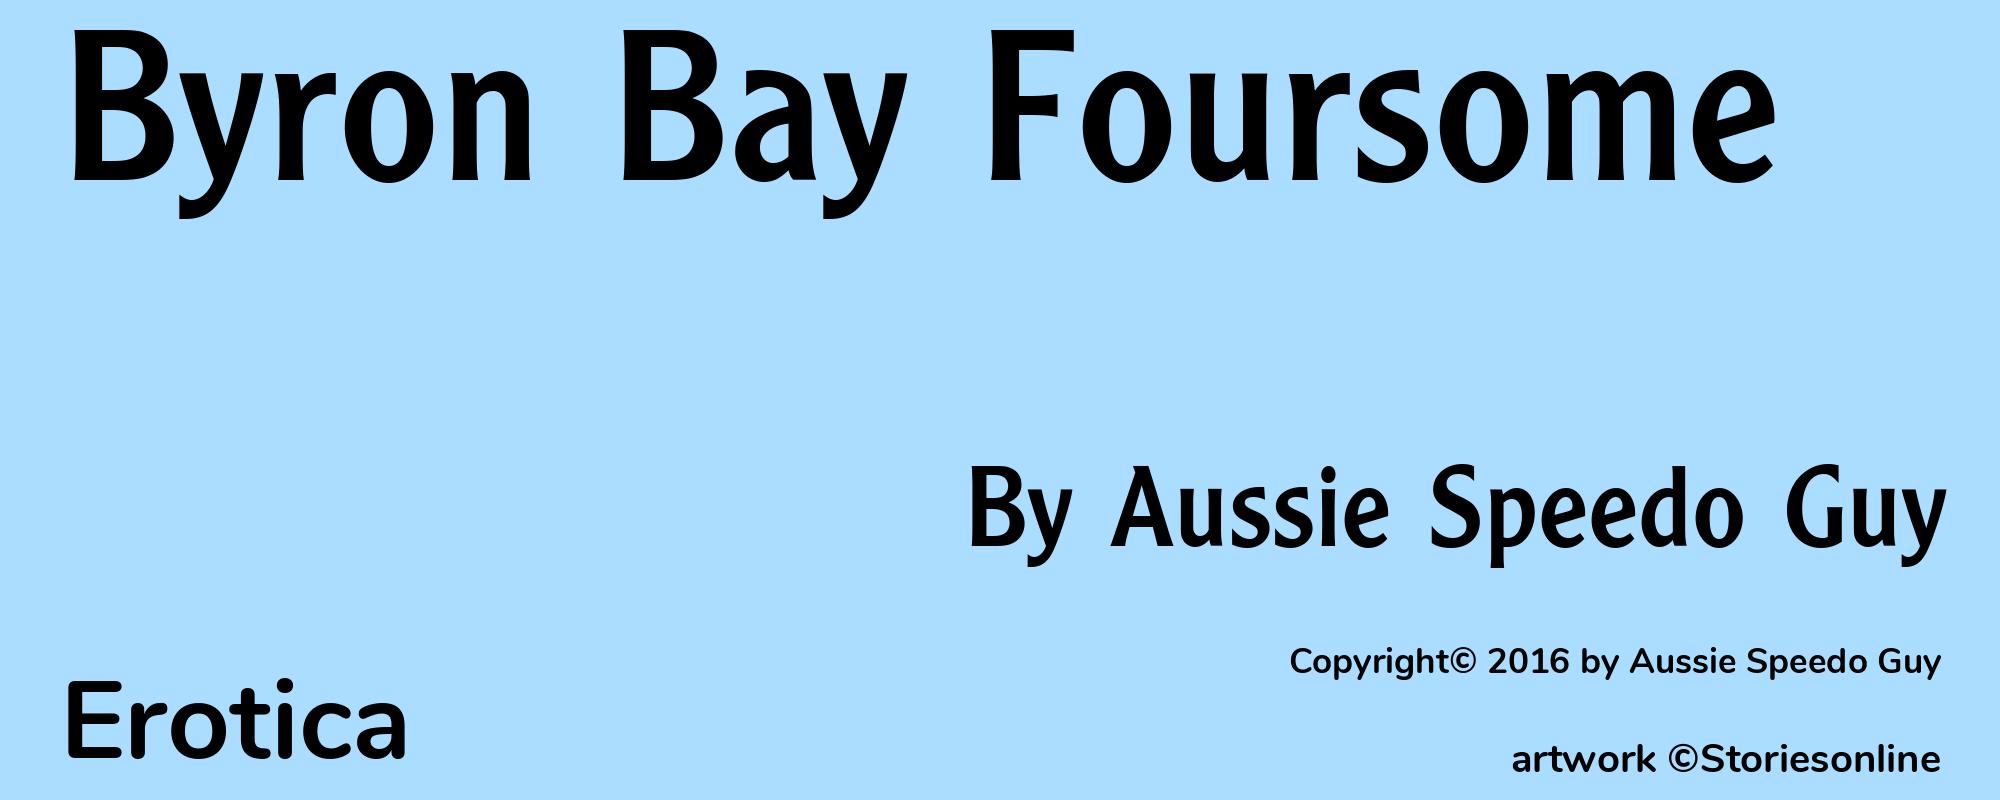 Byron Bay Foursome - Cover